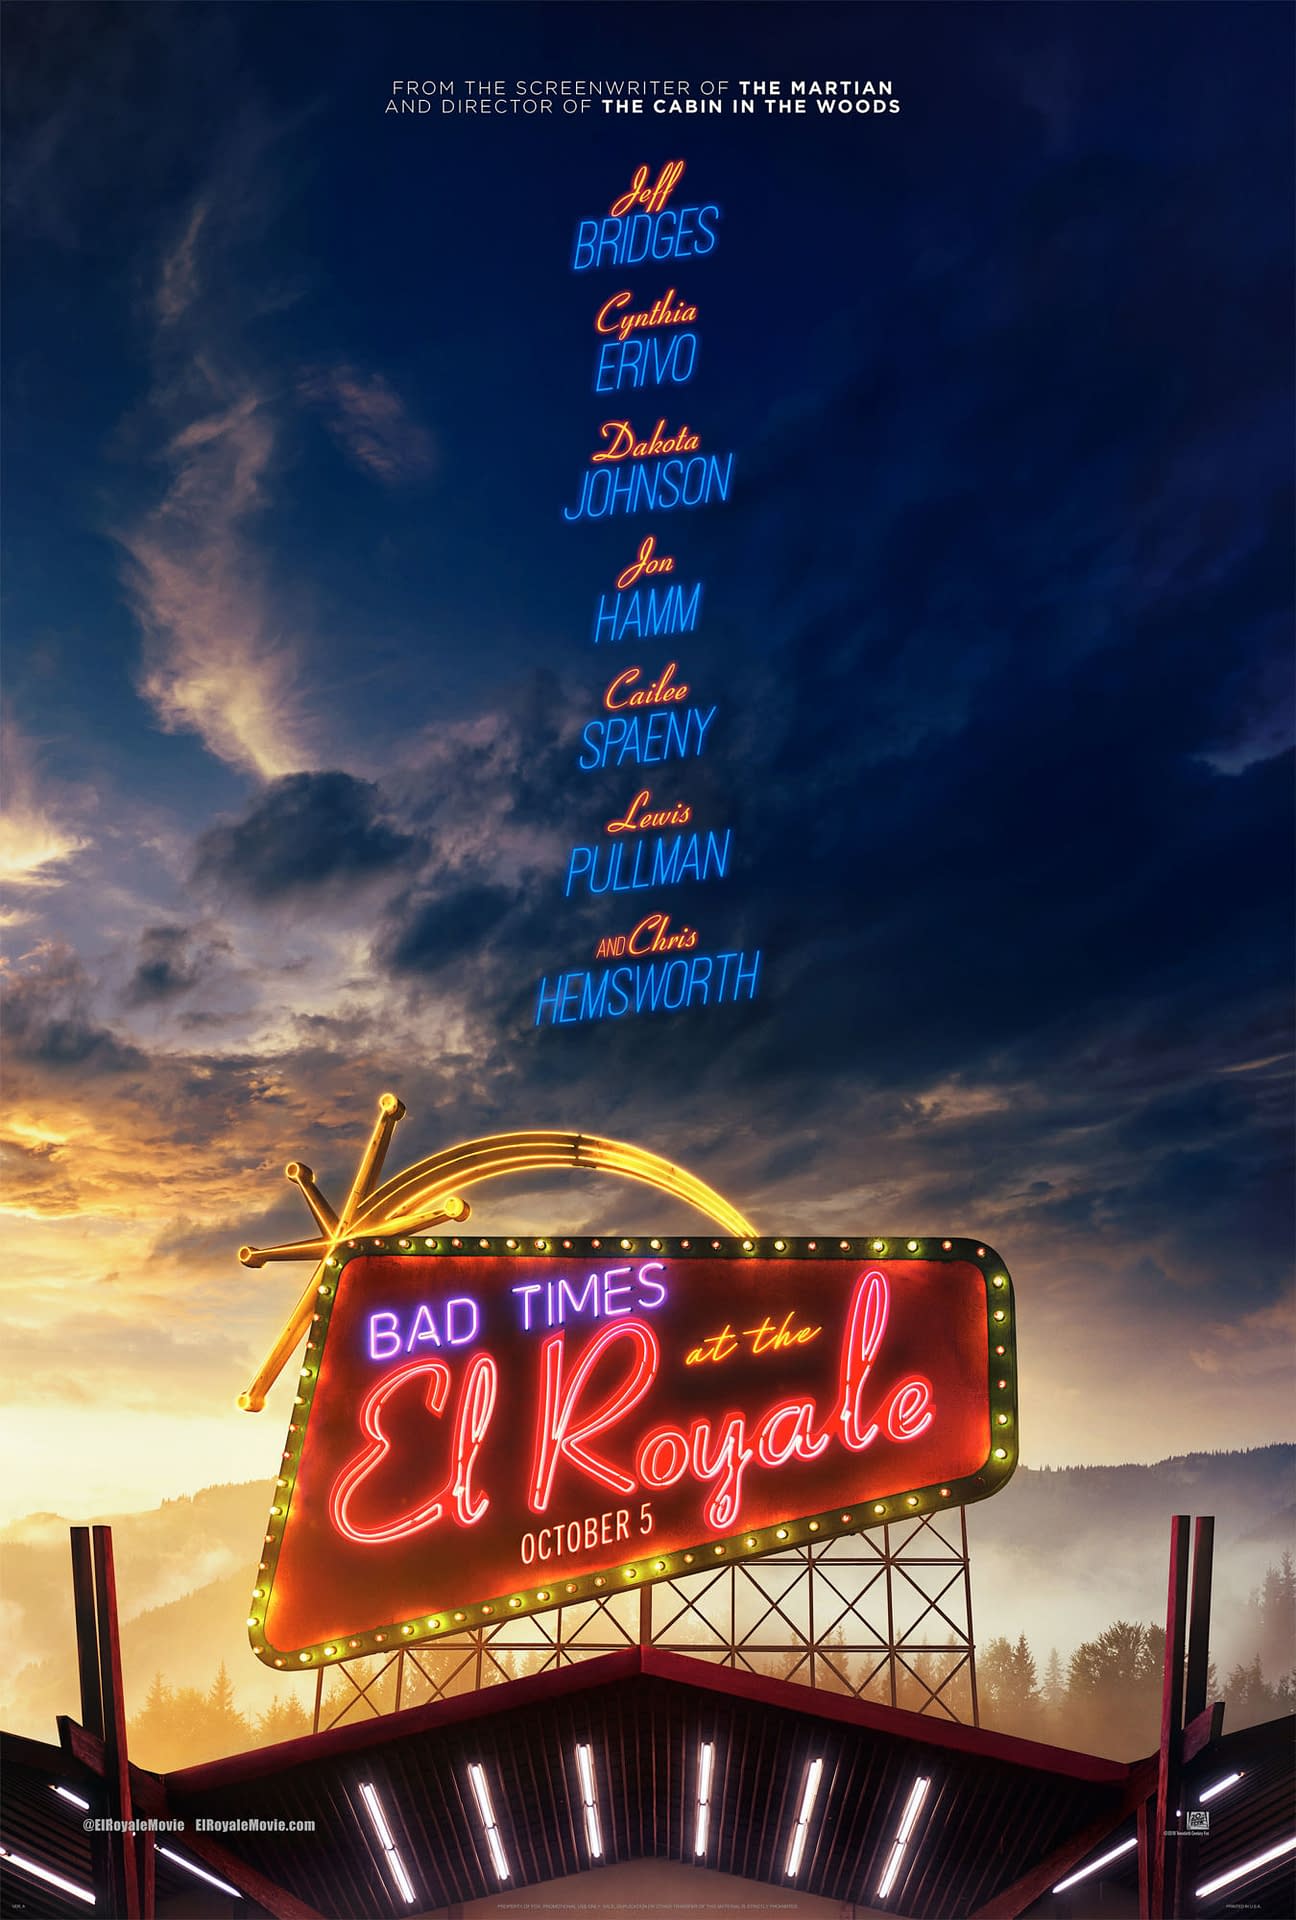 First Trailer, Images, and Poster for Bad Times at the El Royale